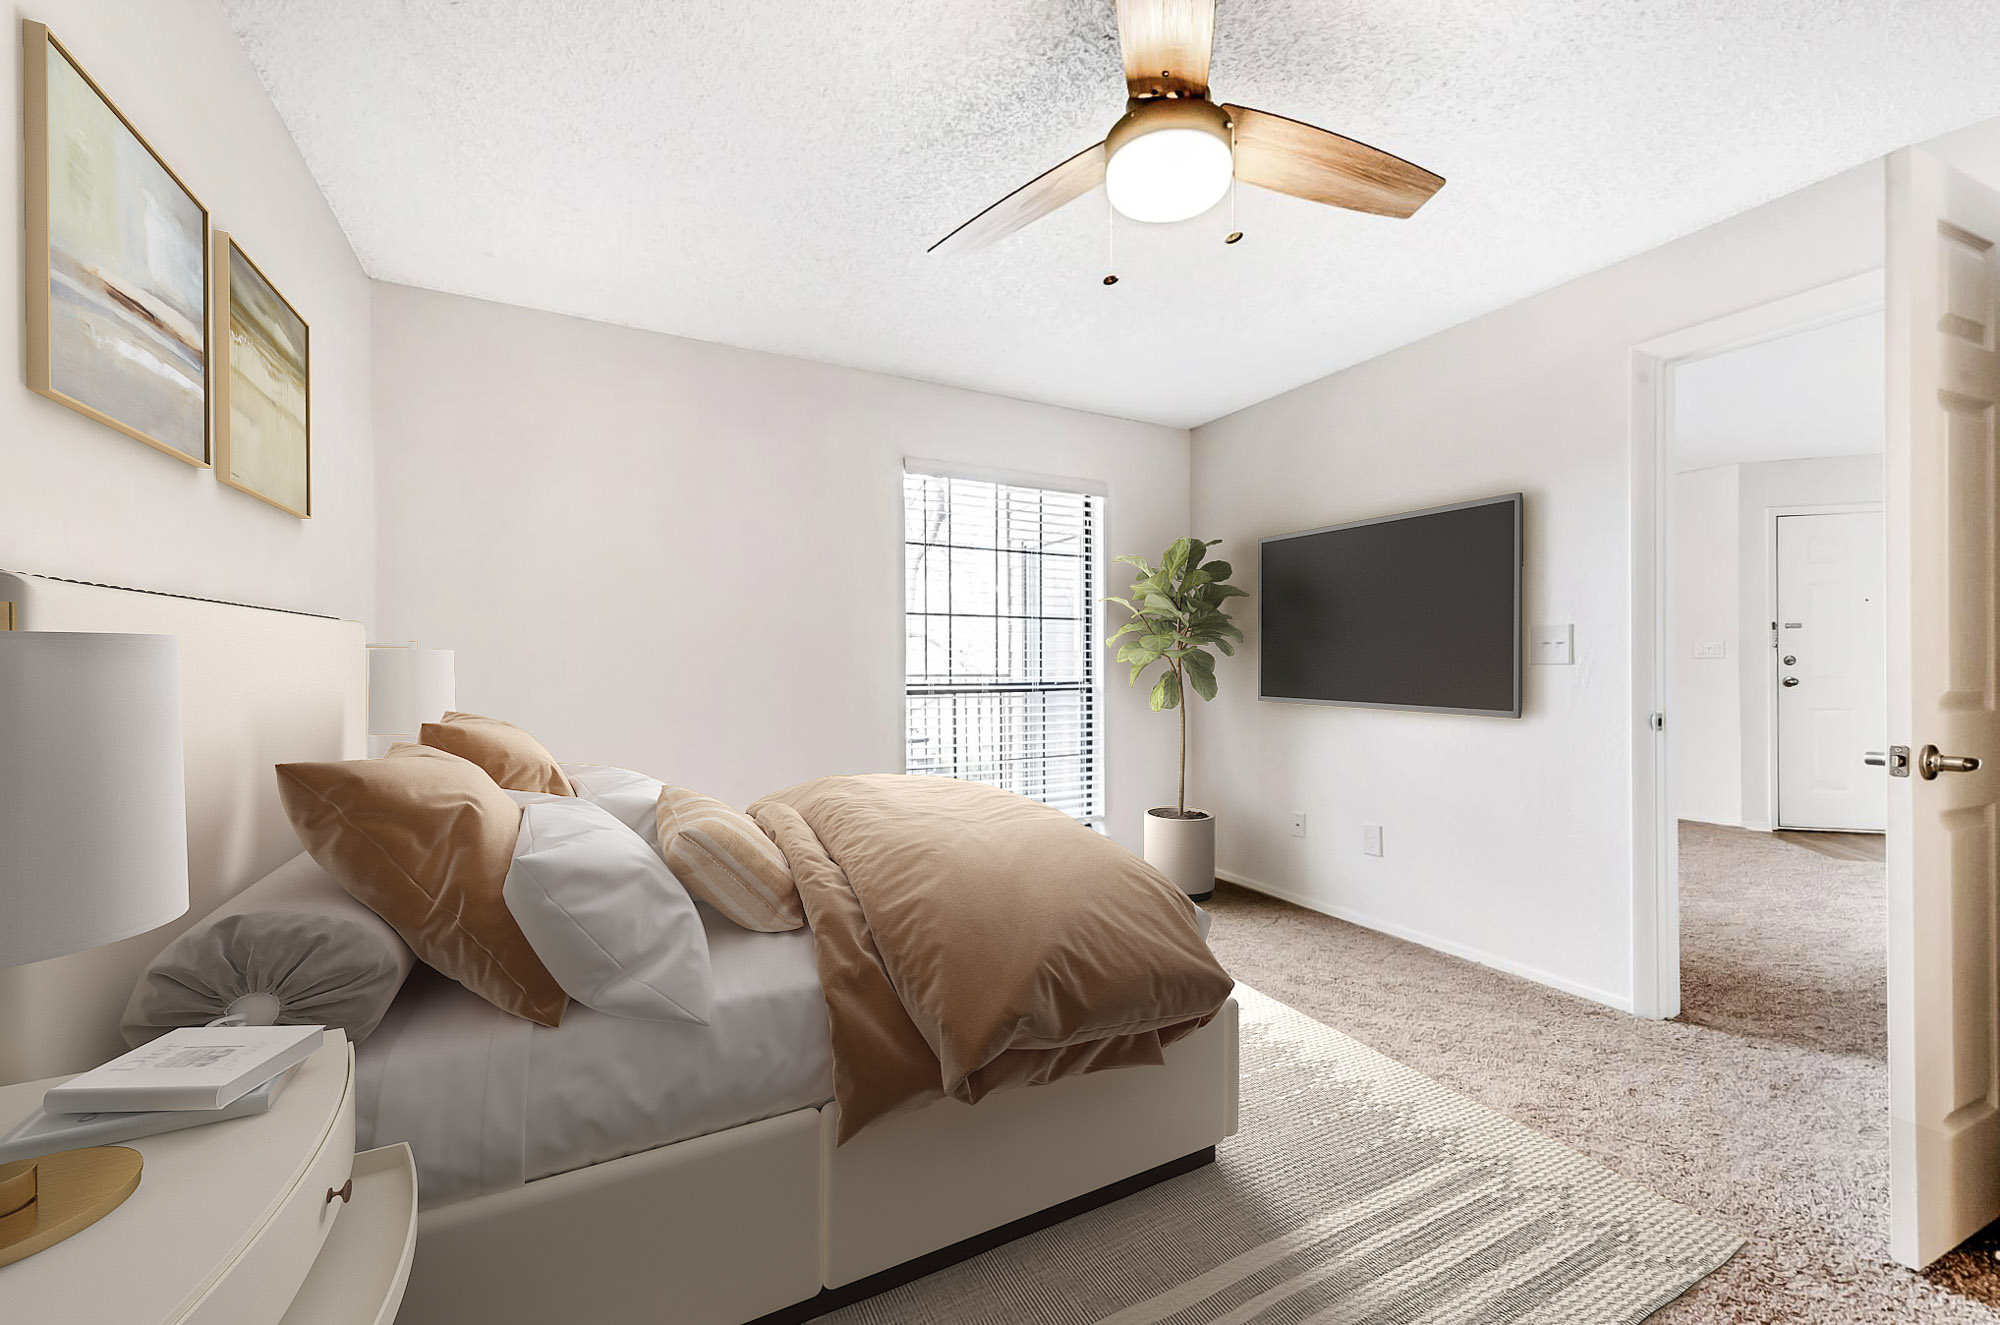 A bedroom at Canyon Chase apartments in Westminster, CO.